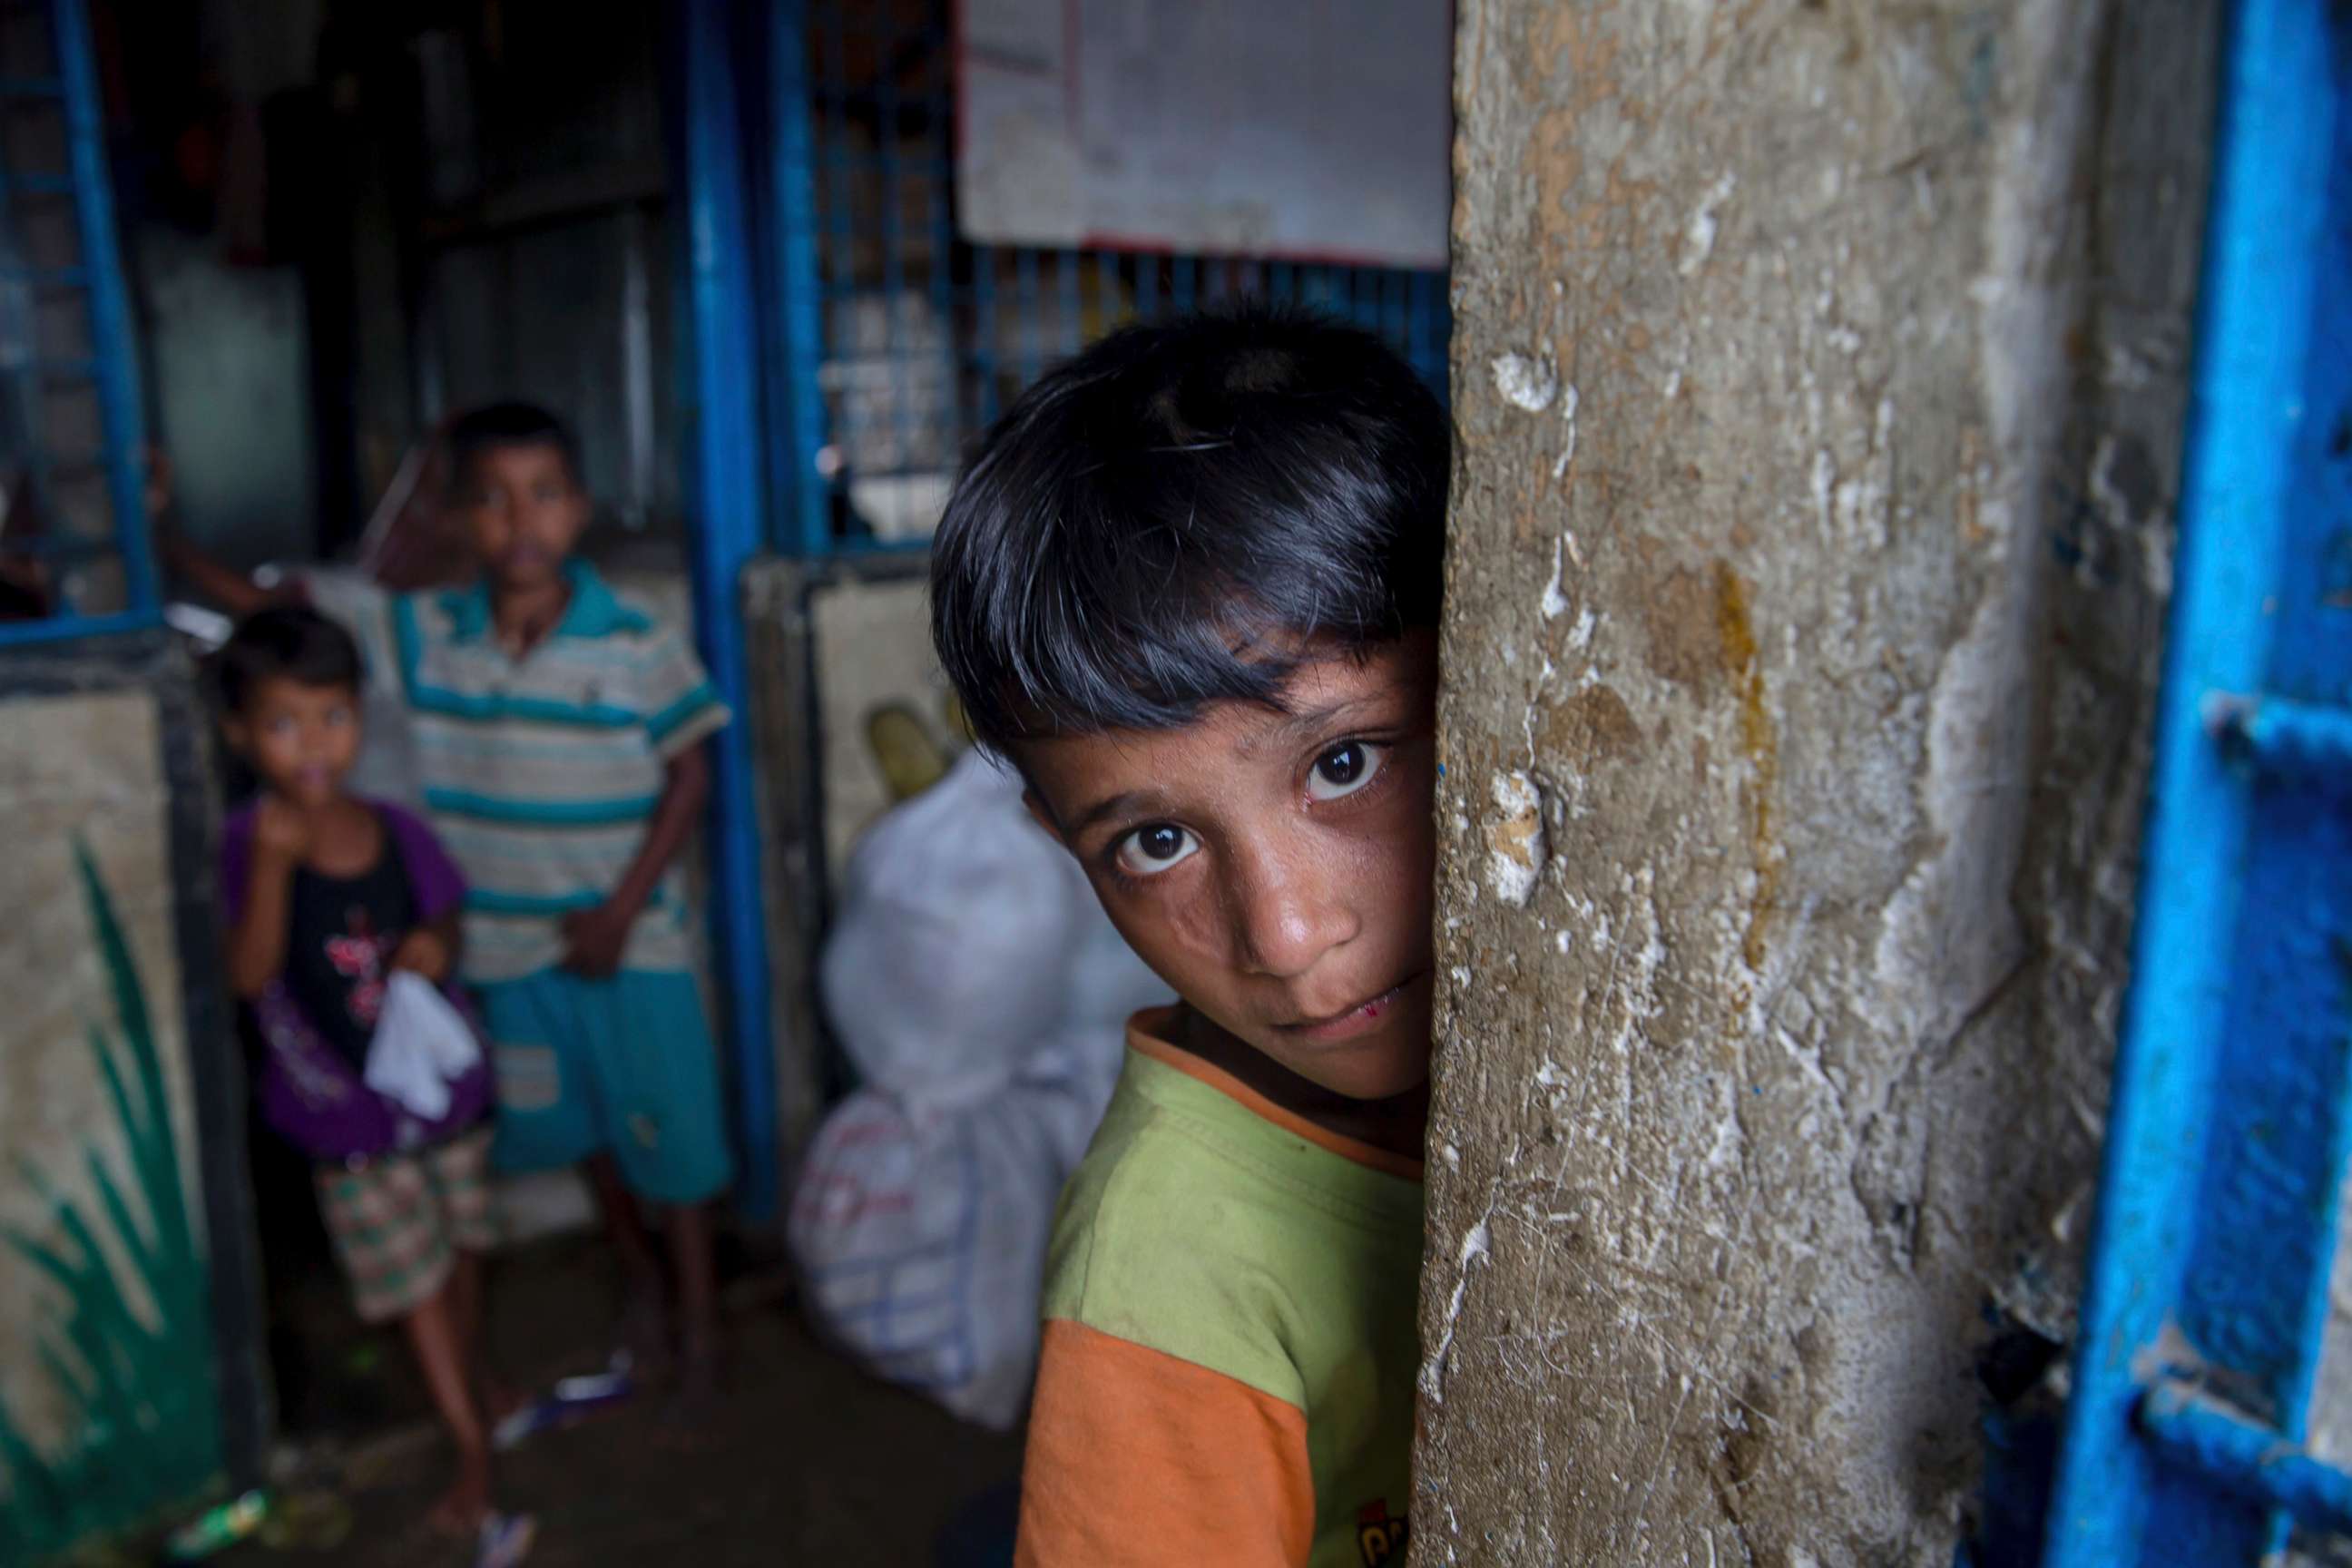 PHOTO: Mohammad Shofait, a Rohingya boy who crossed over from Myanmar into Bangladesh, stands by the entrance of a school in Kutupalong refugee camp, Bangladesh, Oct. 20, 2017. 